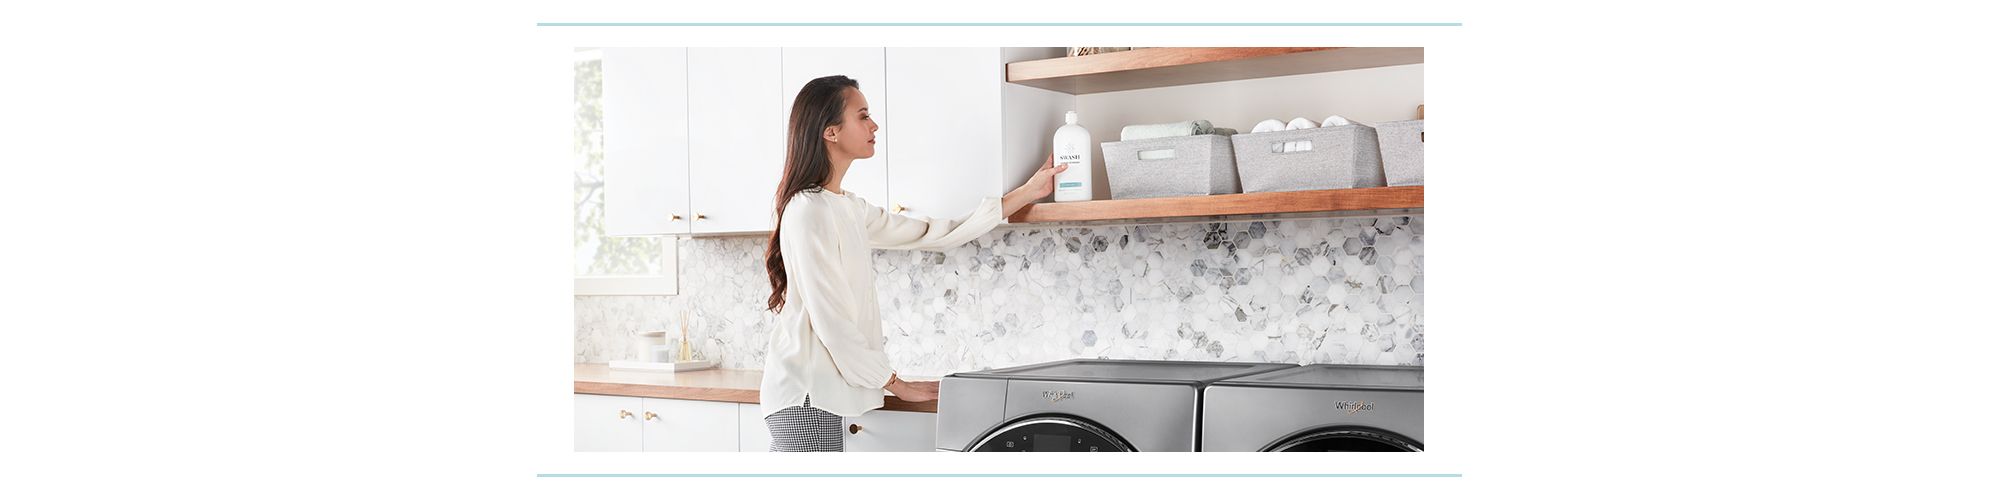 A woman puts a bottle of Swash laundry detergent on a shelf in a laundry room.